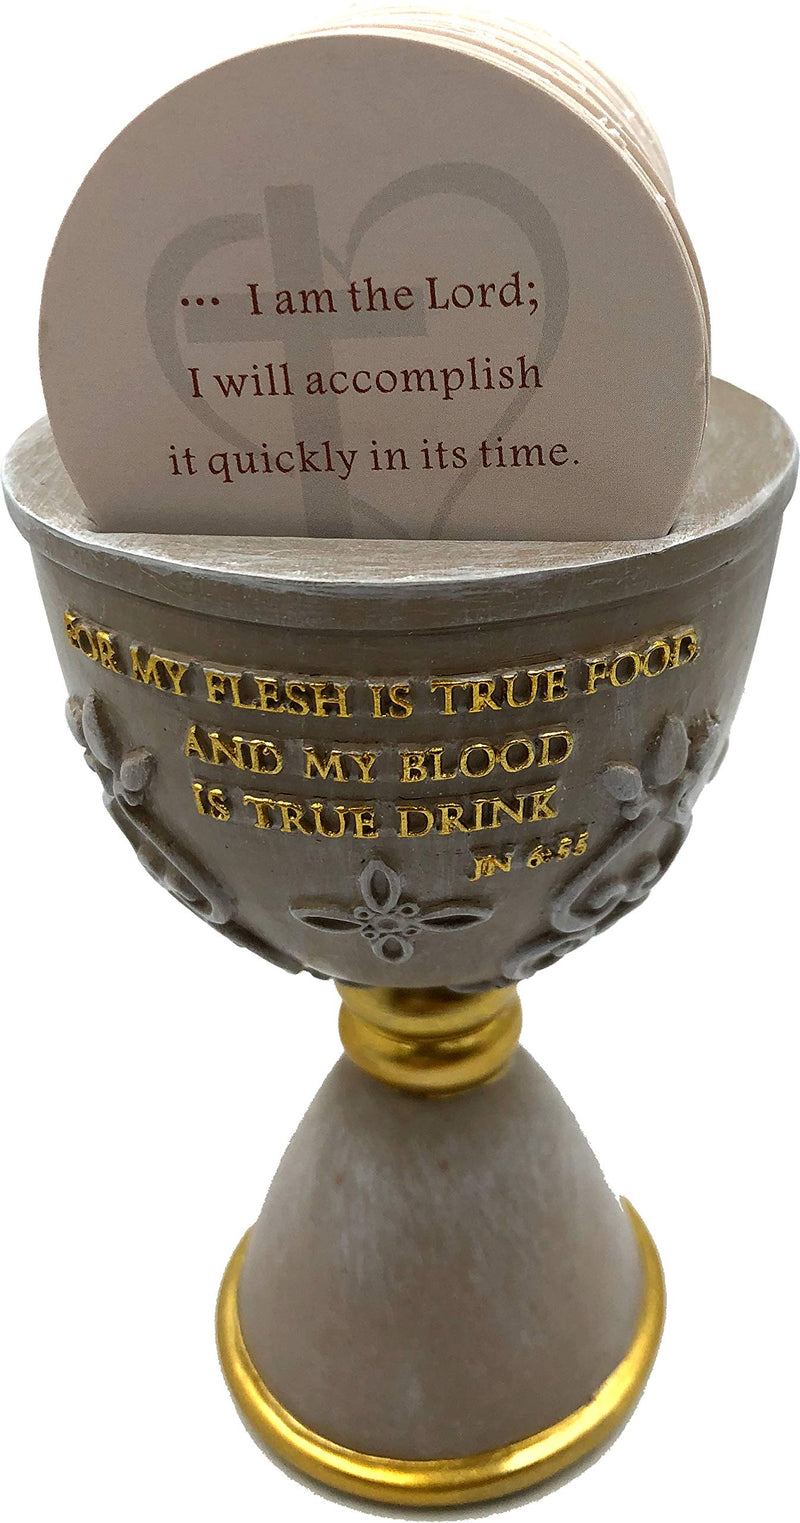 Holy Land Market Stone Communion Cup / Chalice and Hosts with 150 Different Biblical Verses ( 6 Inches high ) - Vintage Antique